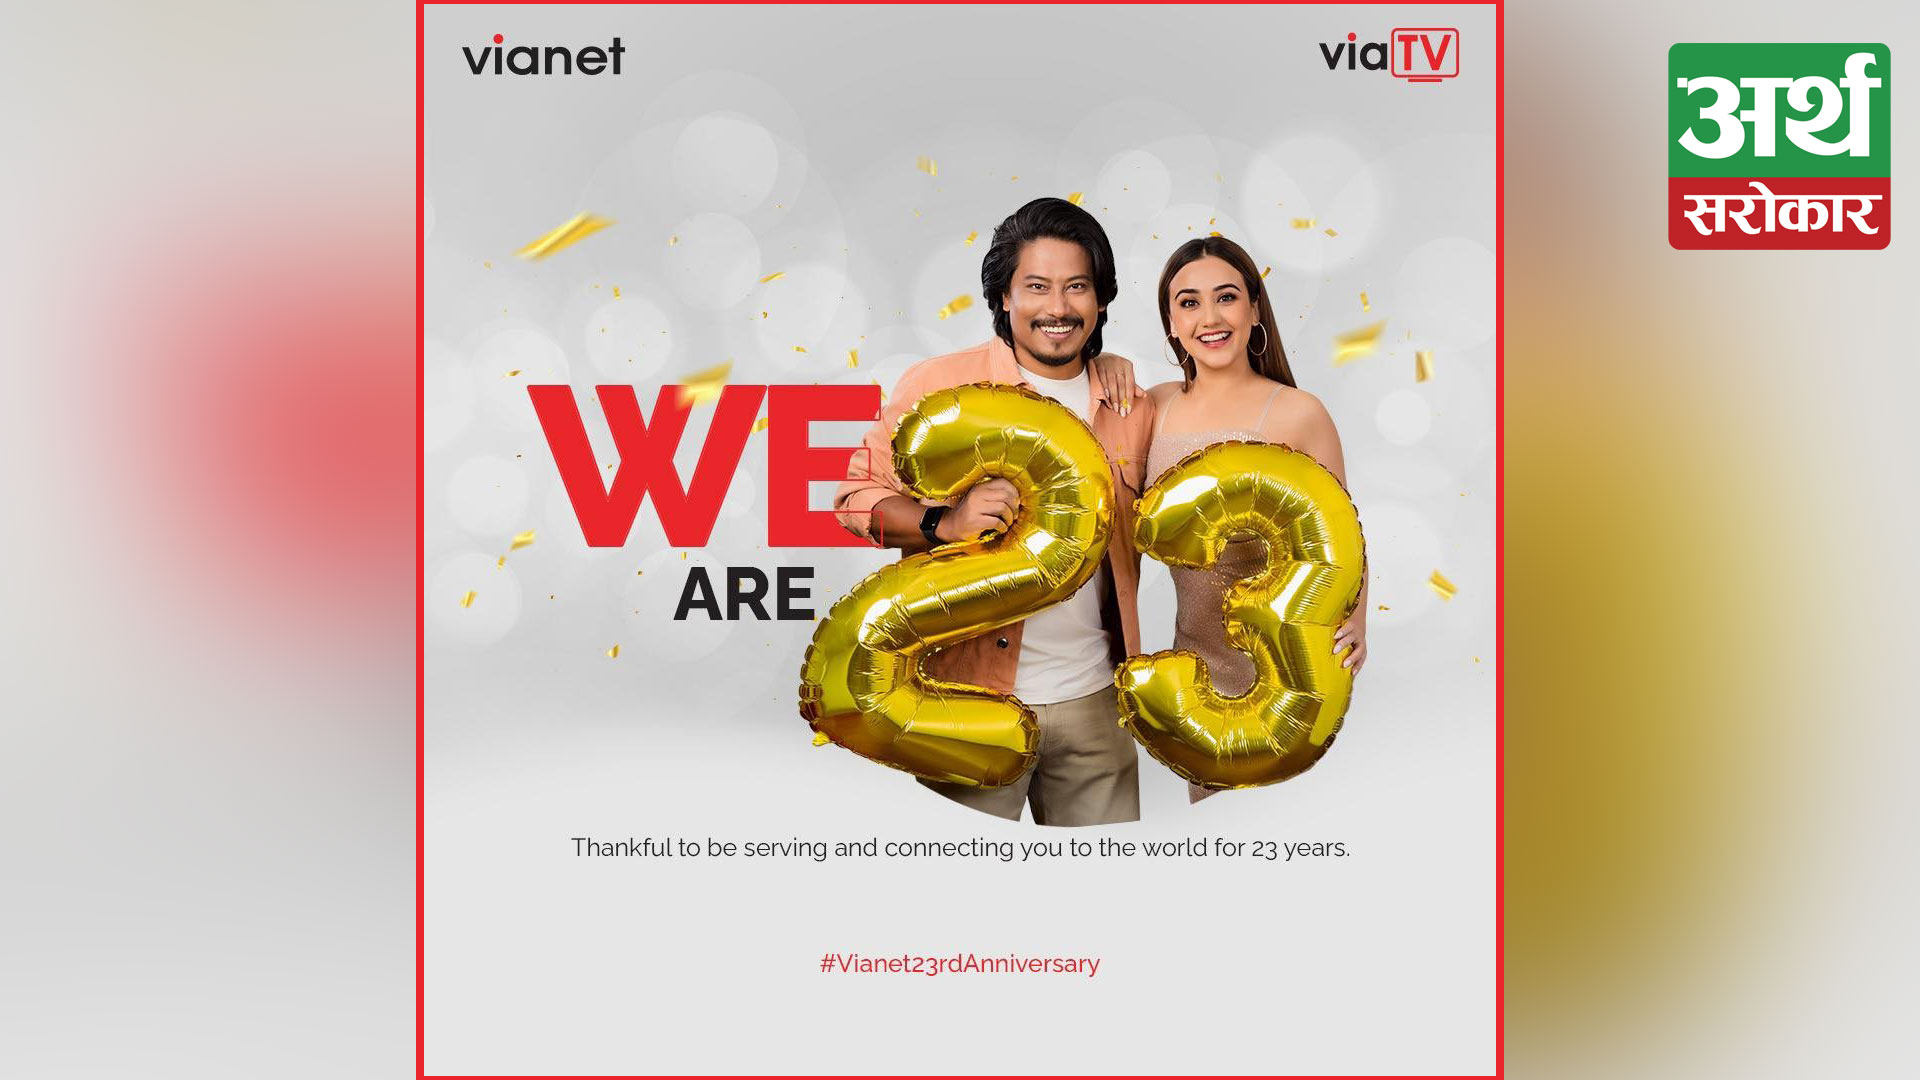 Vianet Communications completes 23 years of its operation